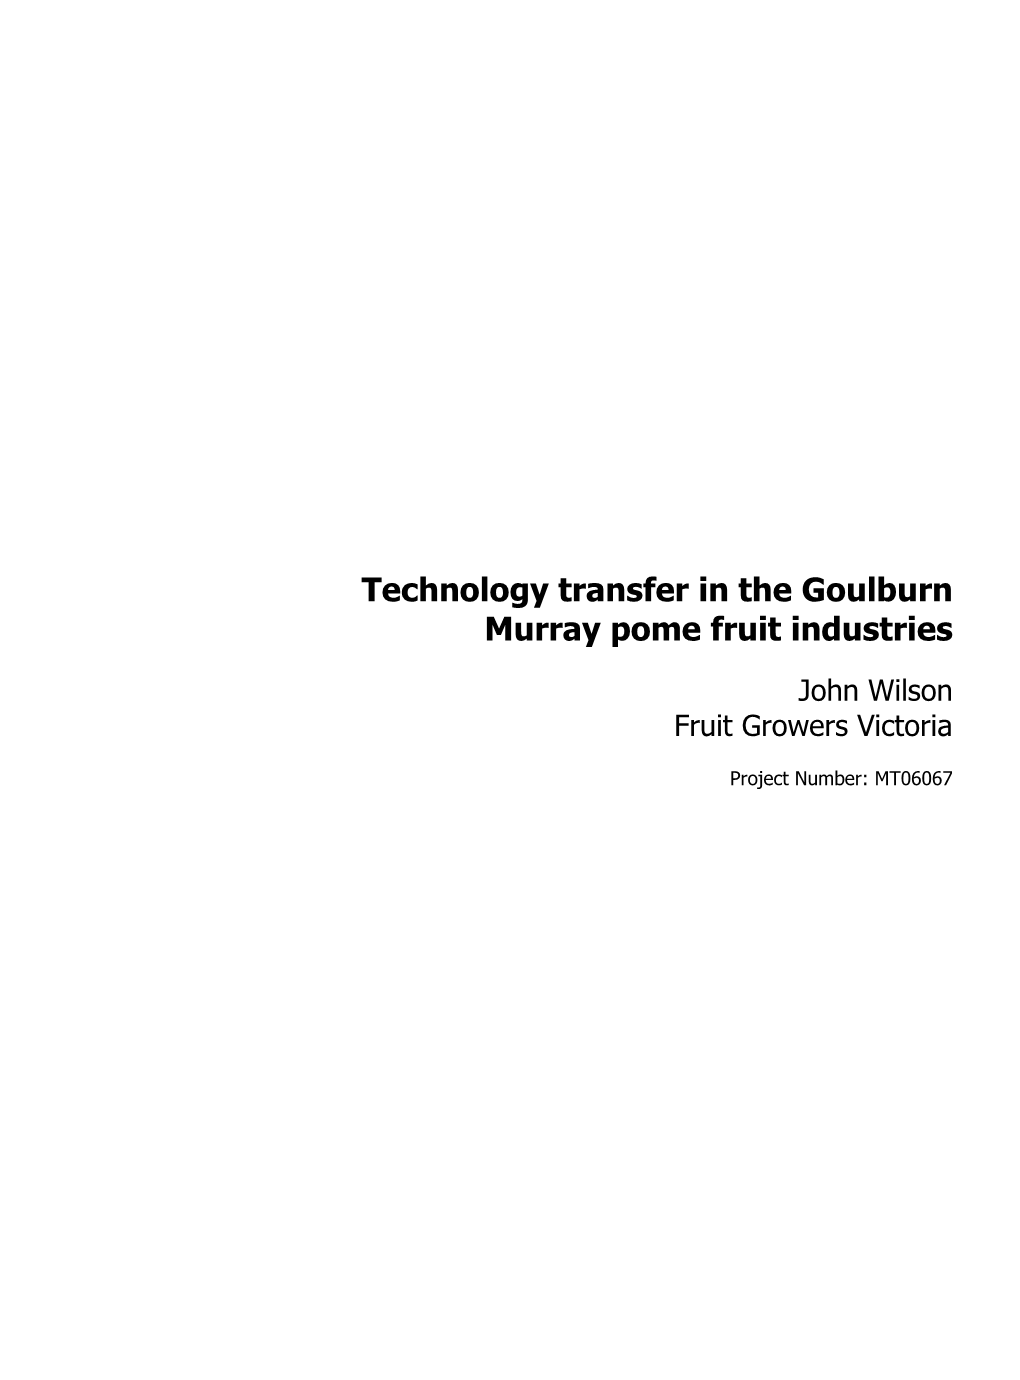 Technology Transfer in the Goulburn Murray Pome Fruit Industries